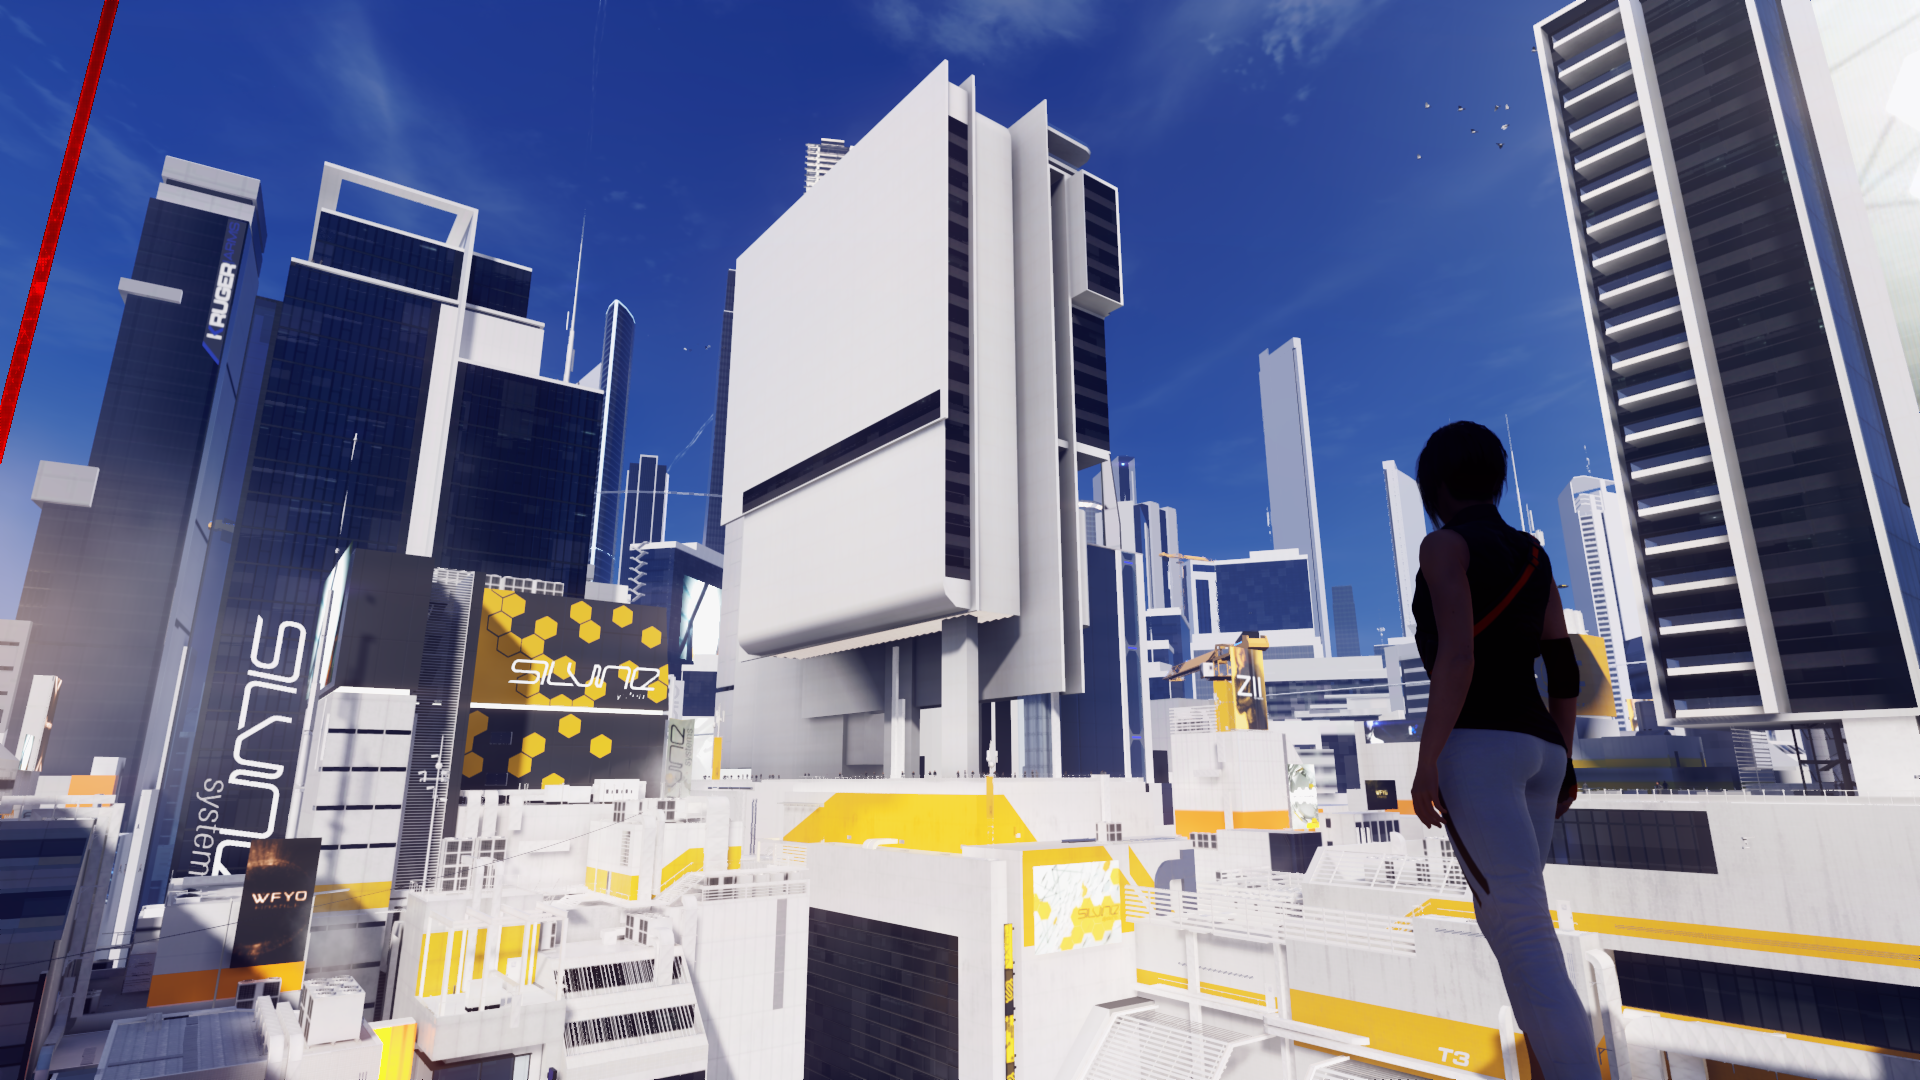 General 1920x1080 Mirror's Edge Catalyst PC gaming screen shot city Futurism cityscape Mirror's Edge video game art sunlight video game girls standing video game characters CGI building sleeveless video games digital art